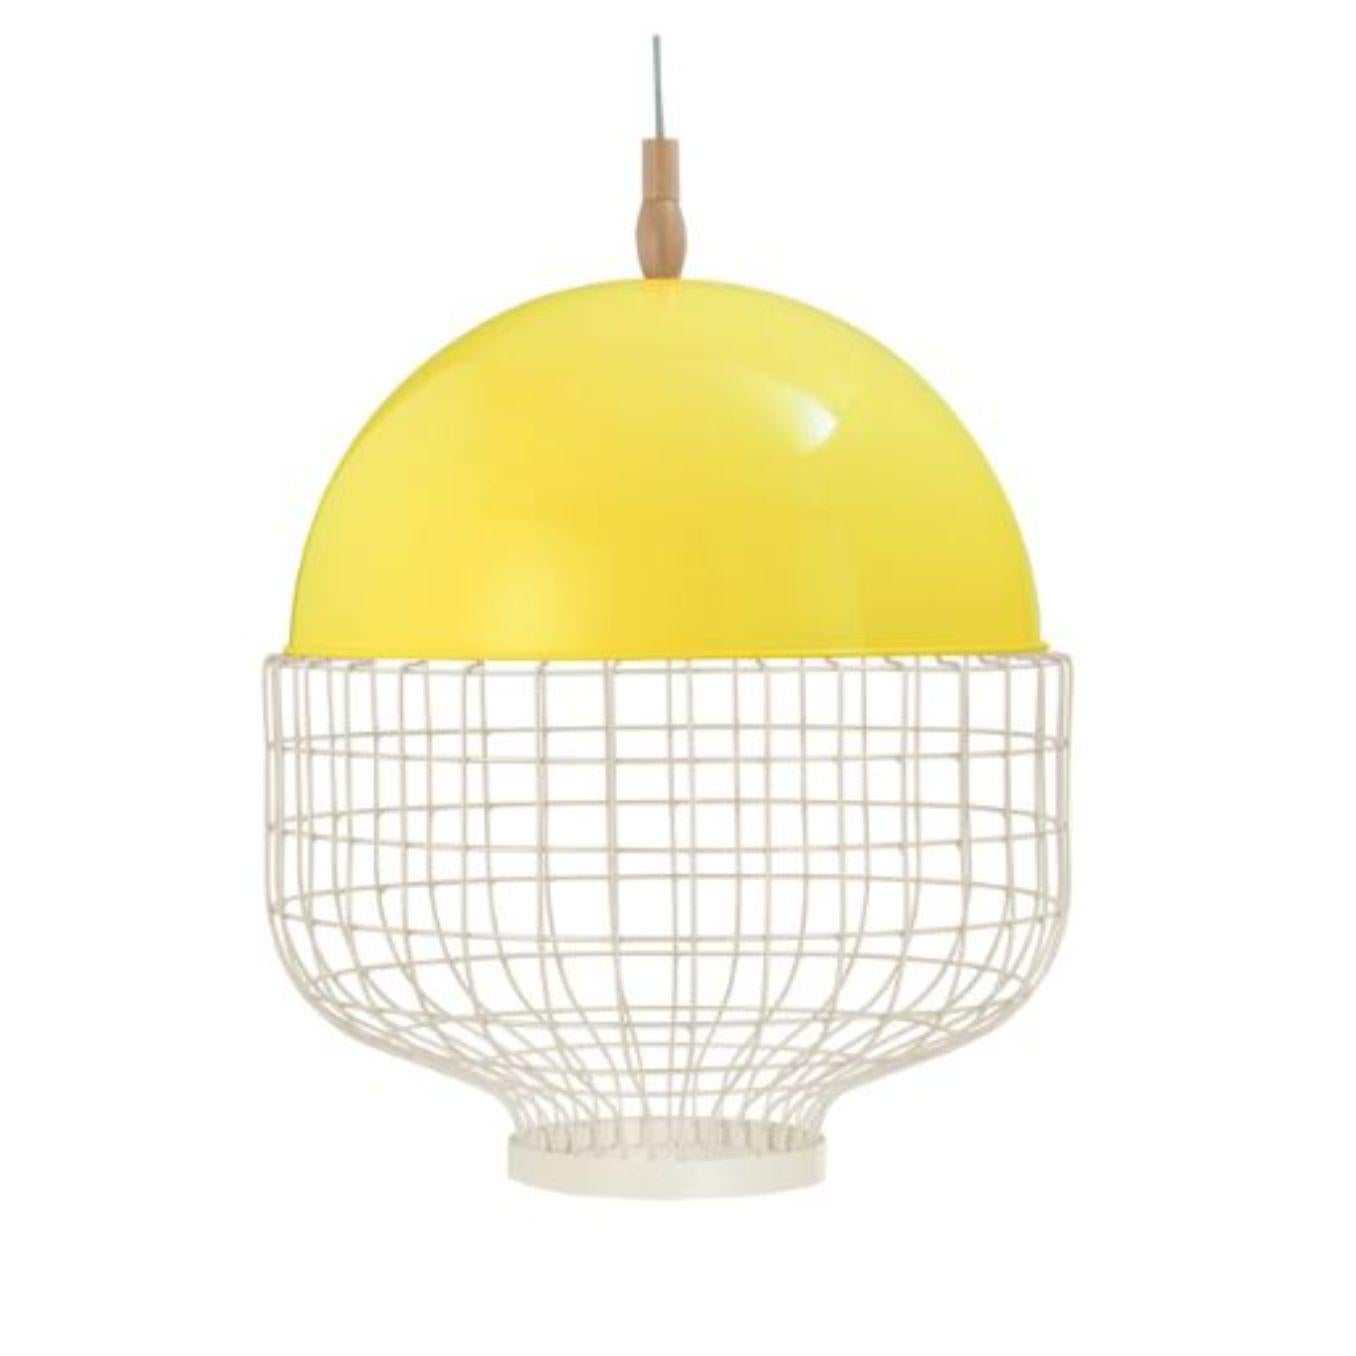 Yellow magnolia suspension lamp by Dooq.
Dimensions: W 65 x D 65 x H 68 cm.
Materials: lacquered metal, polished or brushed metal.
Also available in different colours and materials. 

Information:
230V/50Hz
E27/1x20W LED
120V/60Hz
E26/1x15W